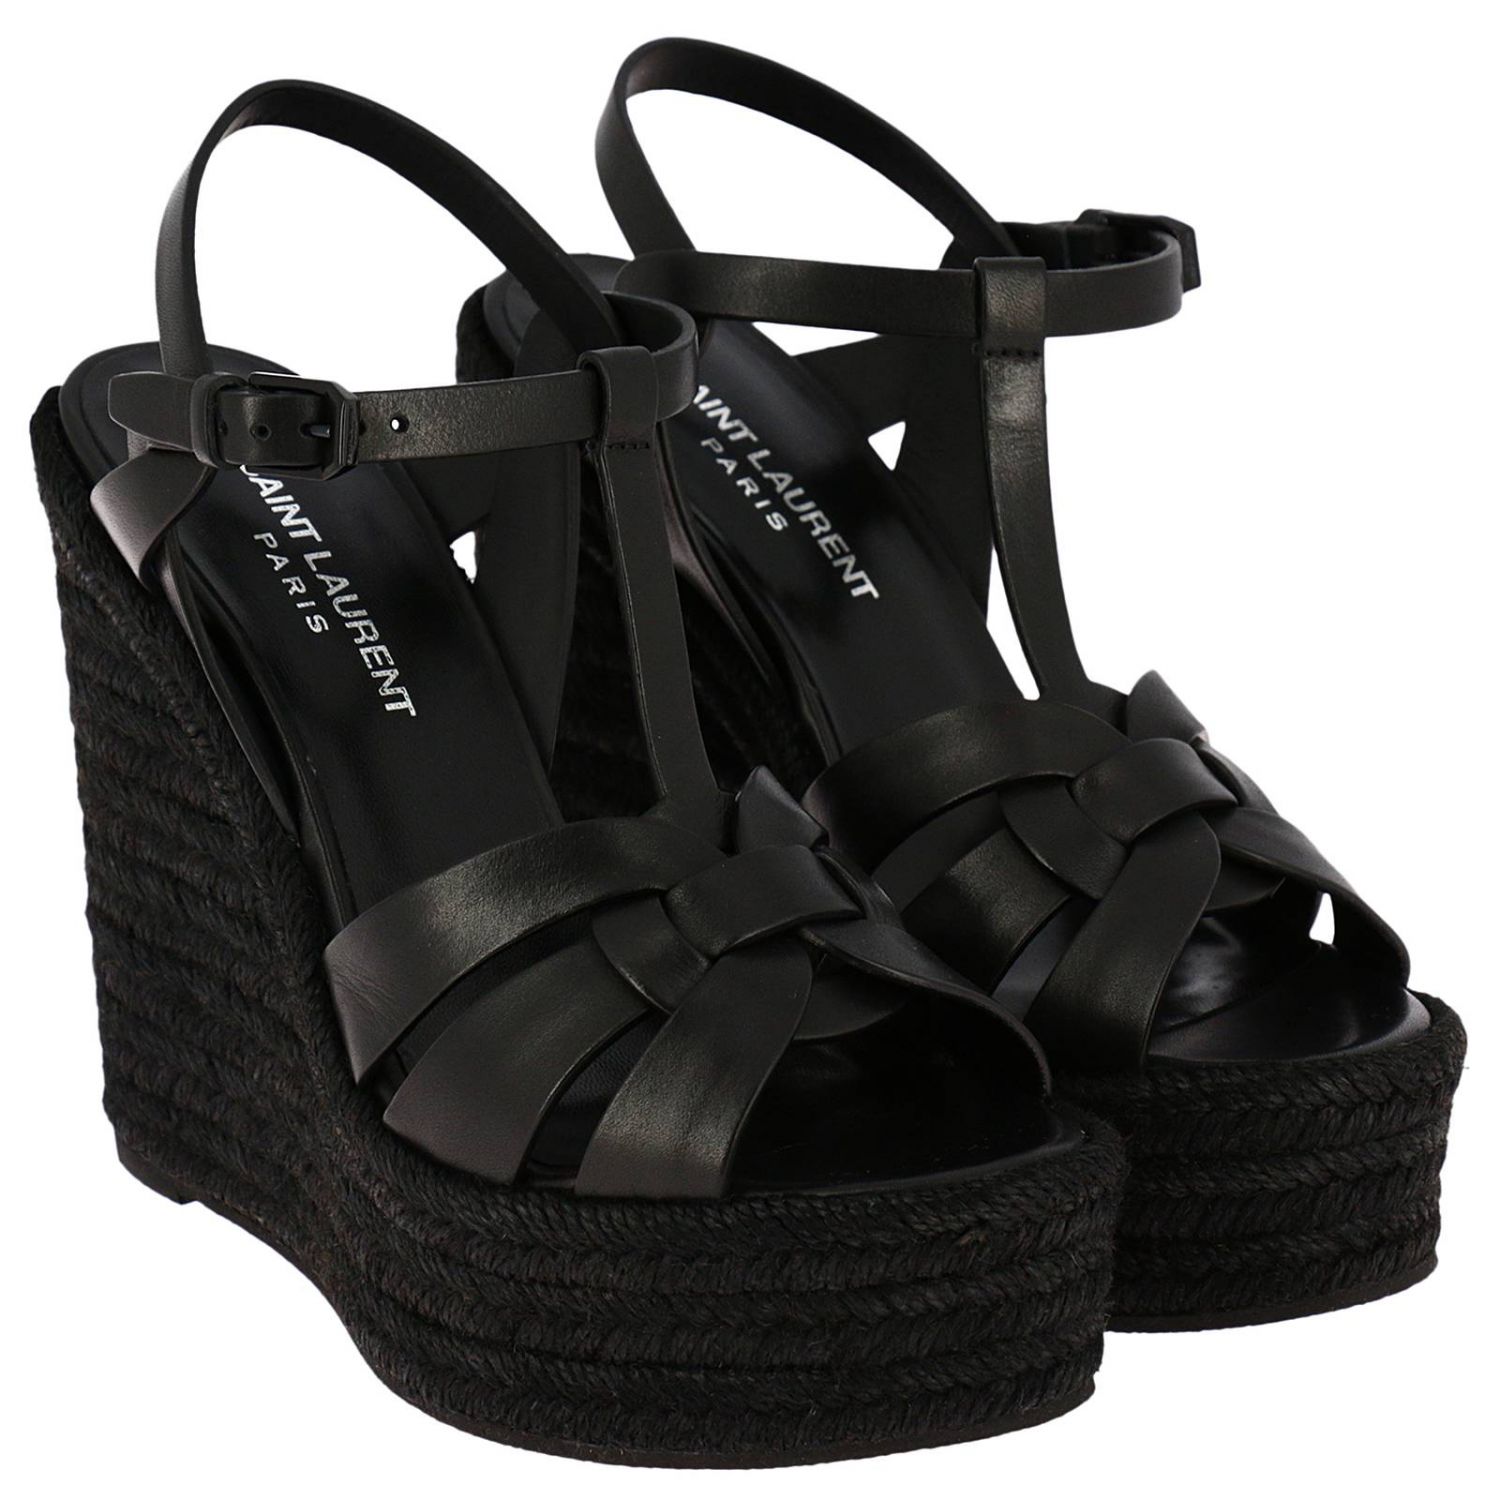 SAINT LAURENT: YSL Tribute wedge sandal in genuine leather and tone-on ...